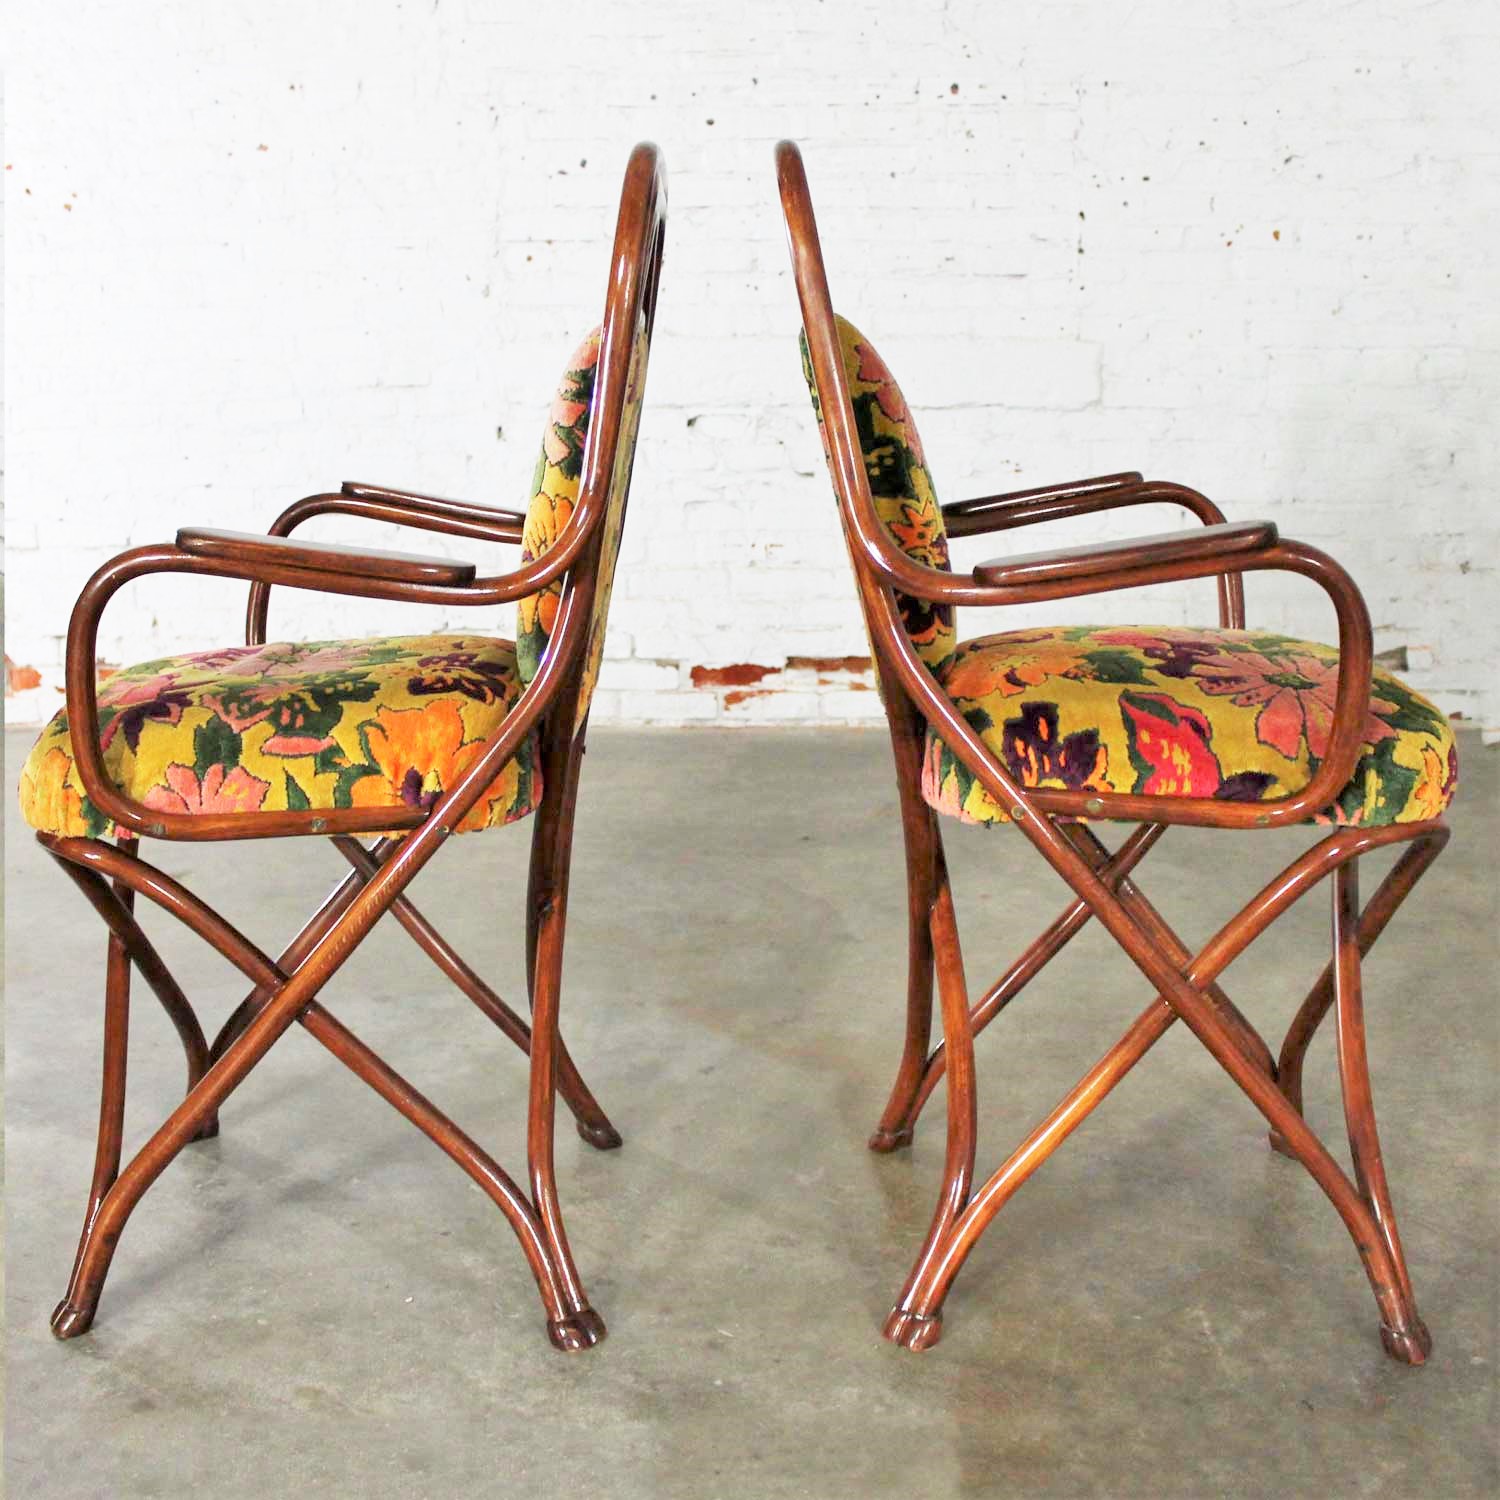 Antique Gebruder Thonet Bentwood Chairs Upholstered Back and Seat Set of Four